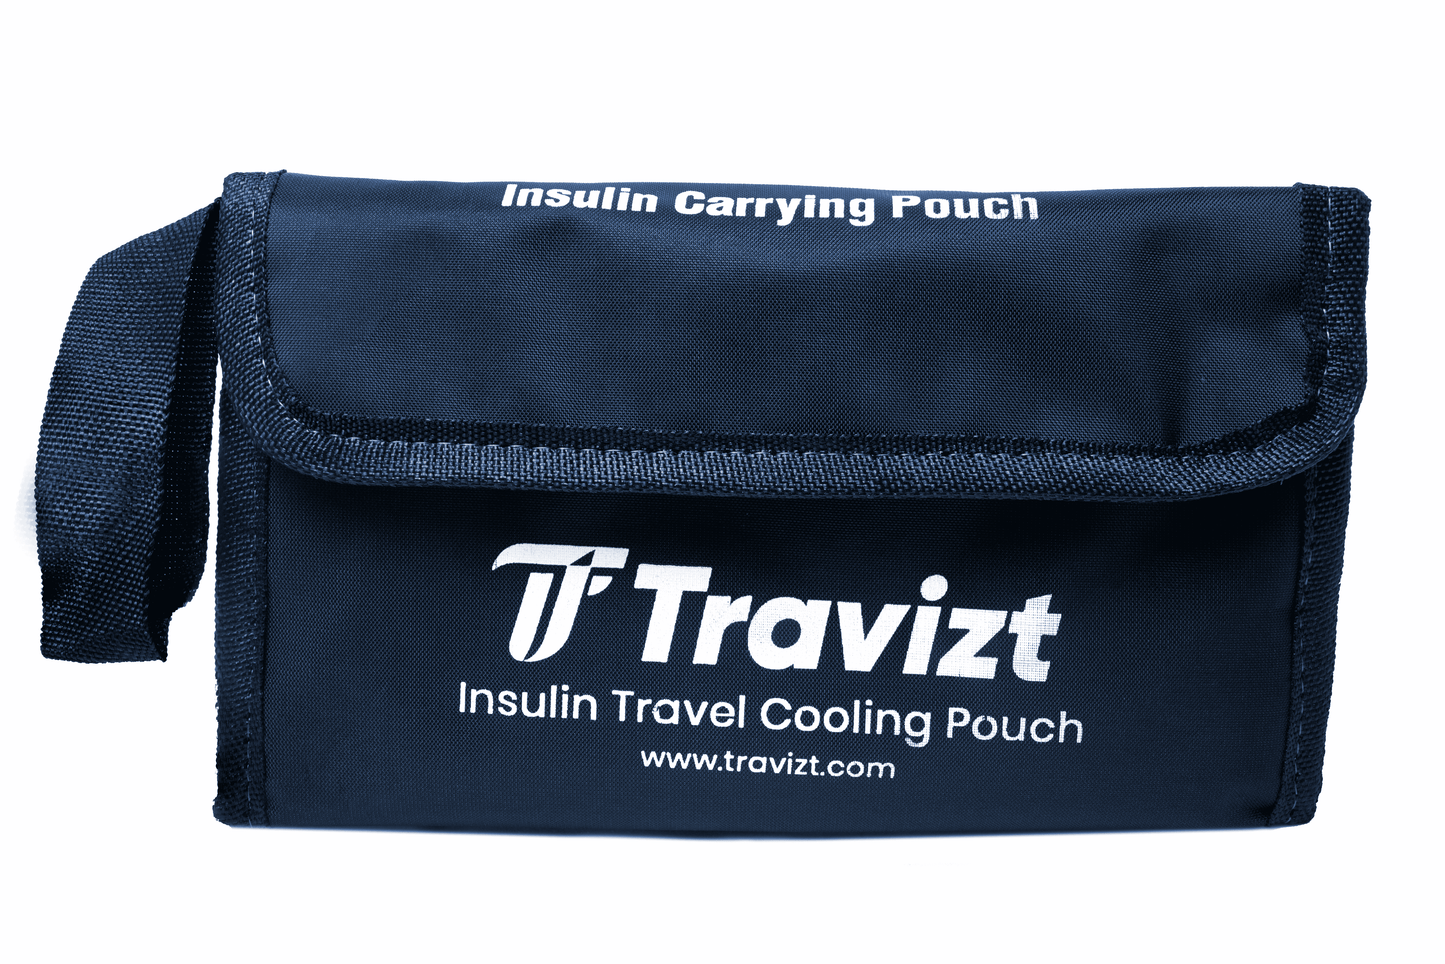 Insulin Travel Bag With Ice Gell Plate